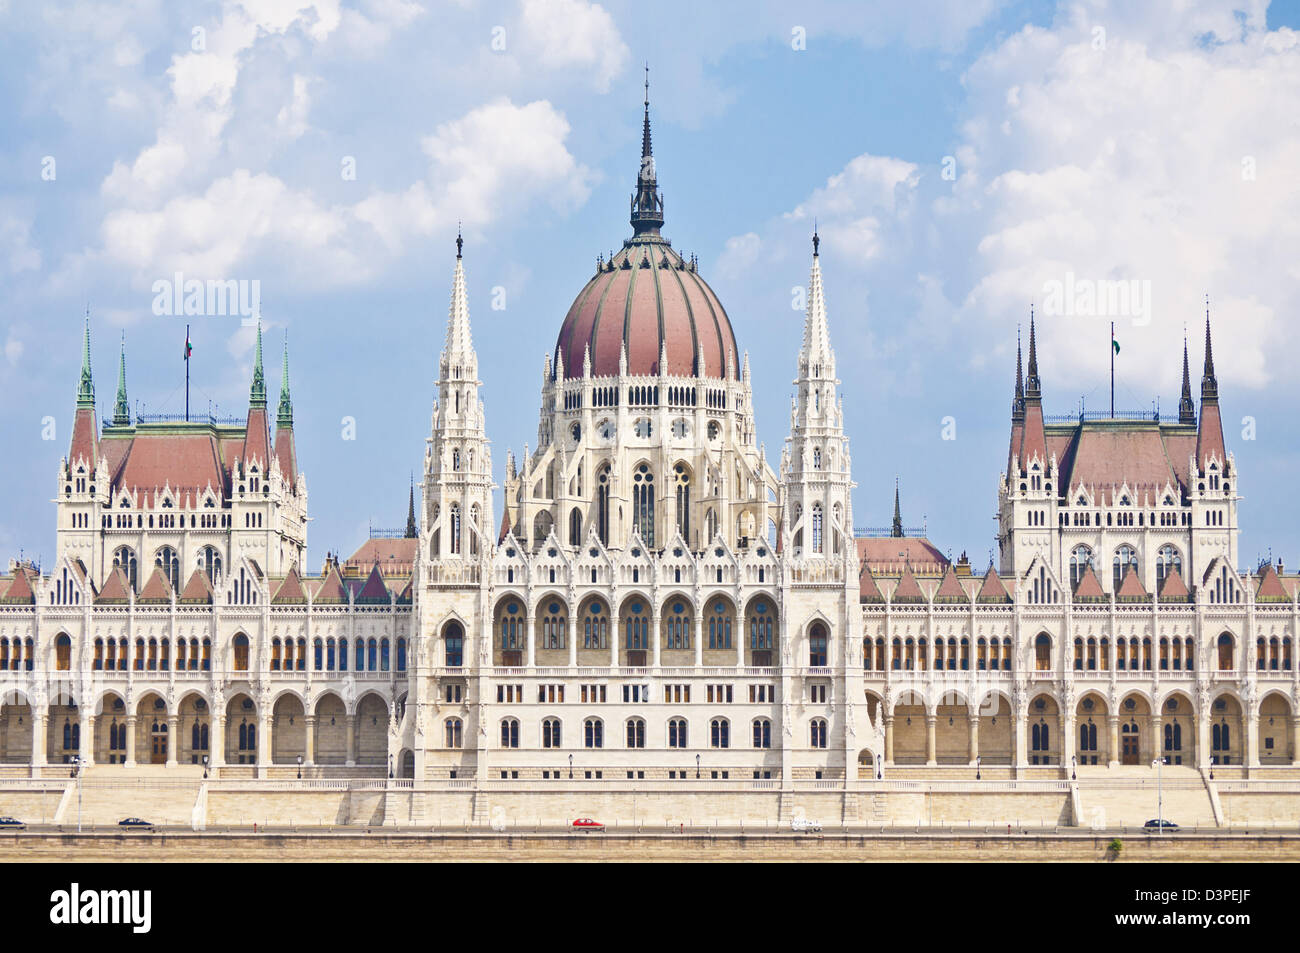 Hungarian Parliament building designed by Imre Steindl with the river Danube in the foreground, Budapest, Hungary, Europe, EU Stock Photo